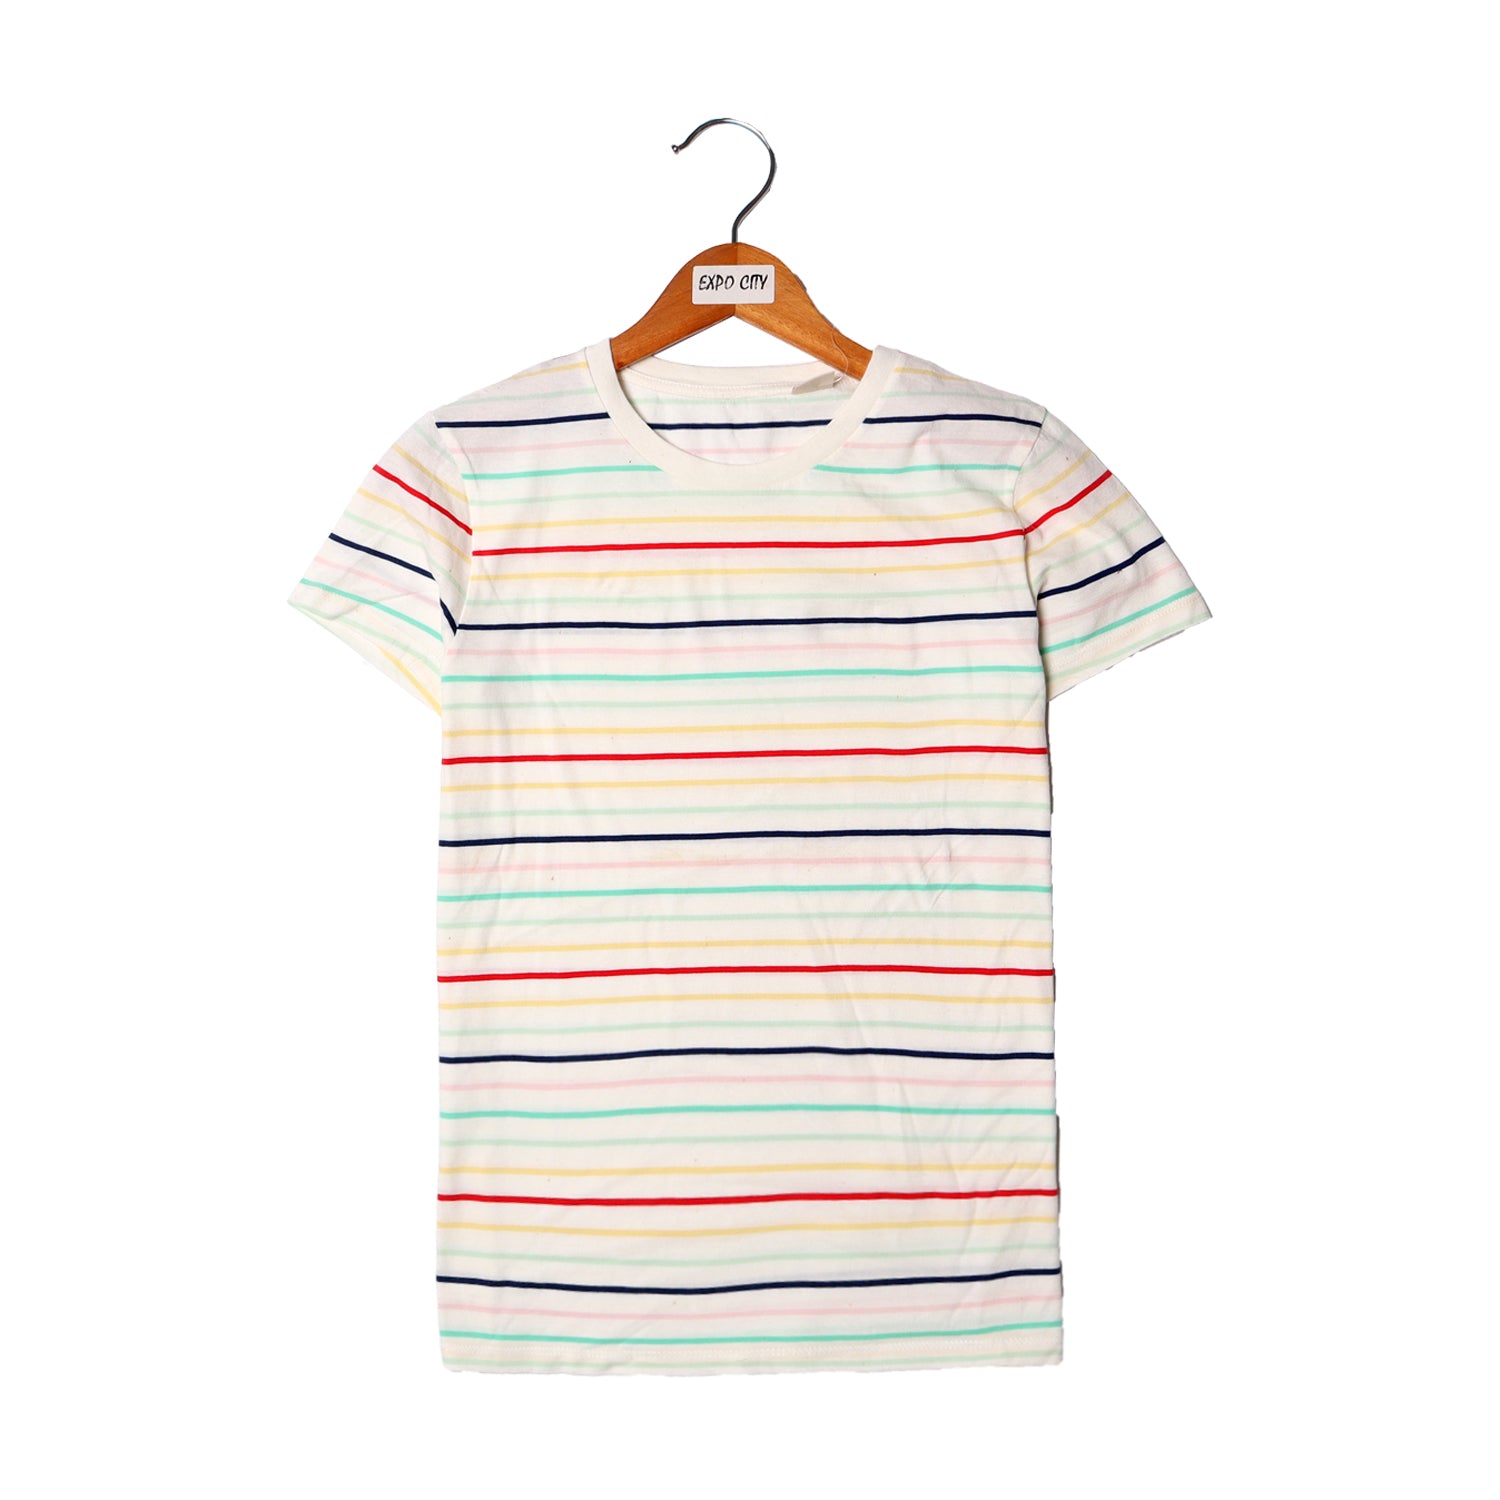 NEW WHITE WITH RED & BLUE THIN STRIPES HALF SLEEVES T-SHIRT FOR GIRLS